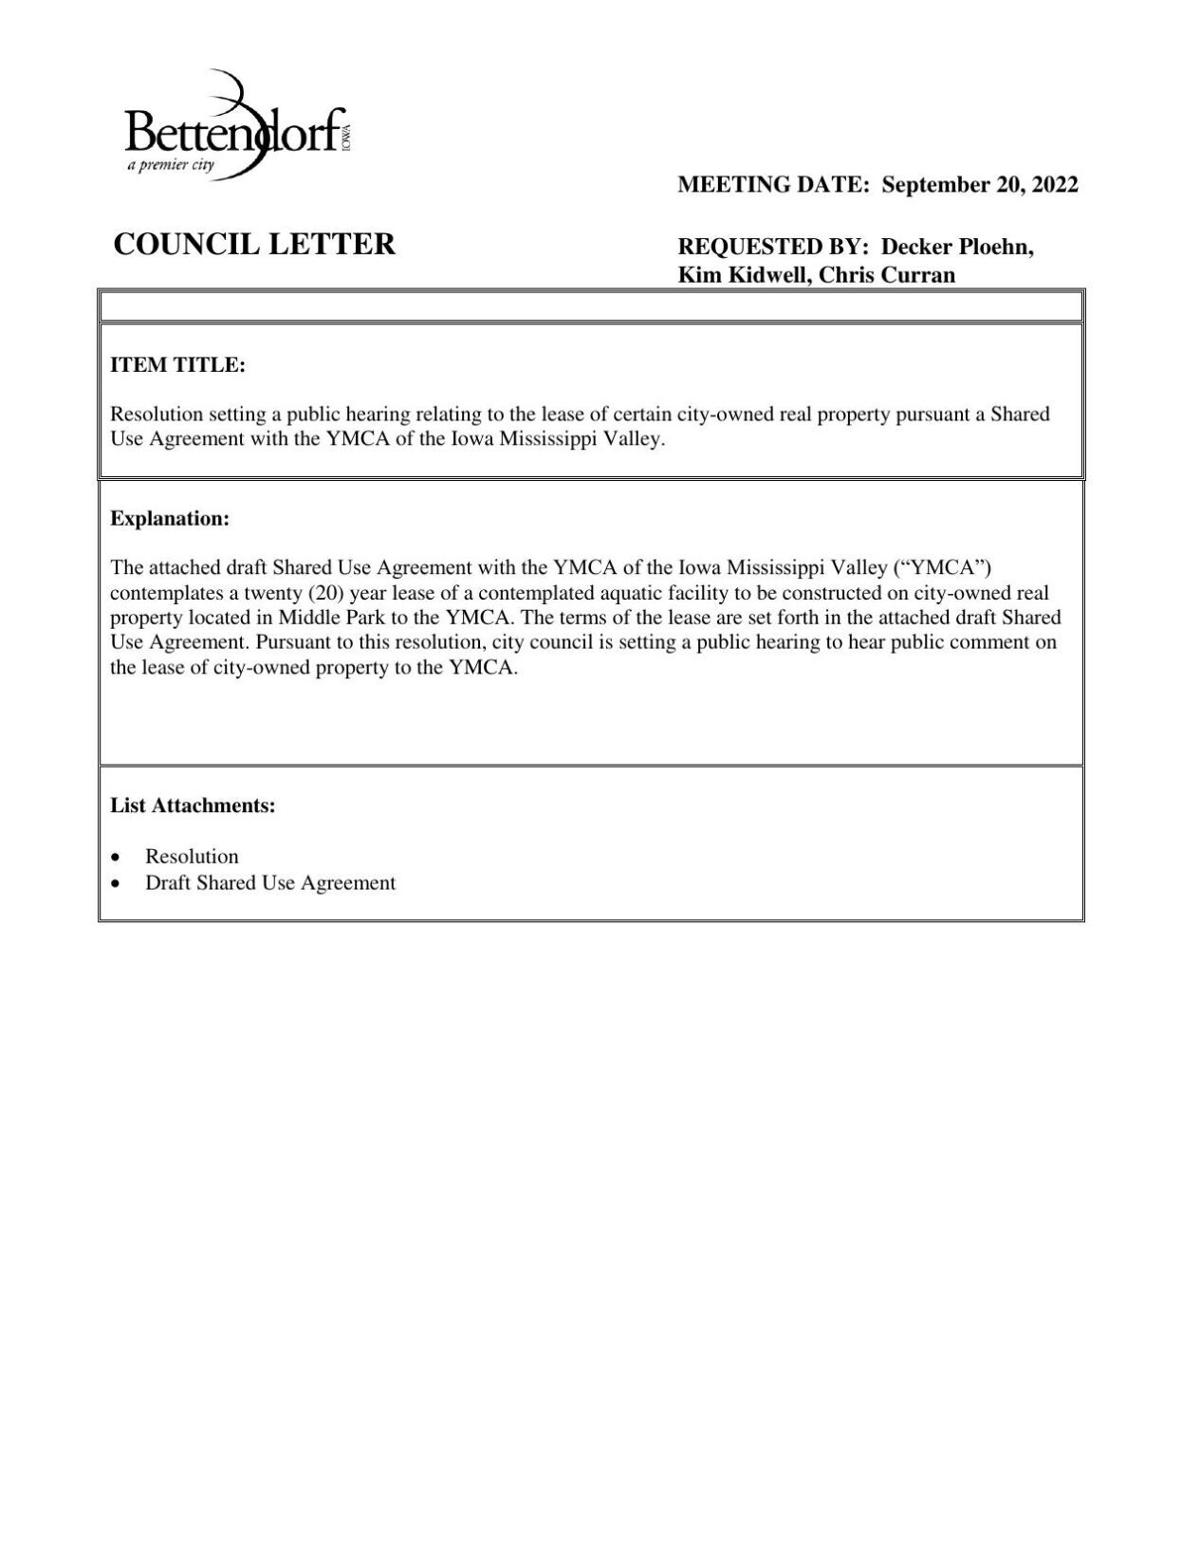 The Landing Agreement Bettendorf and YMCA.pdf